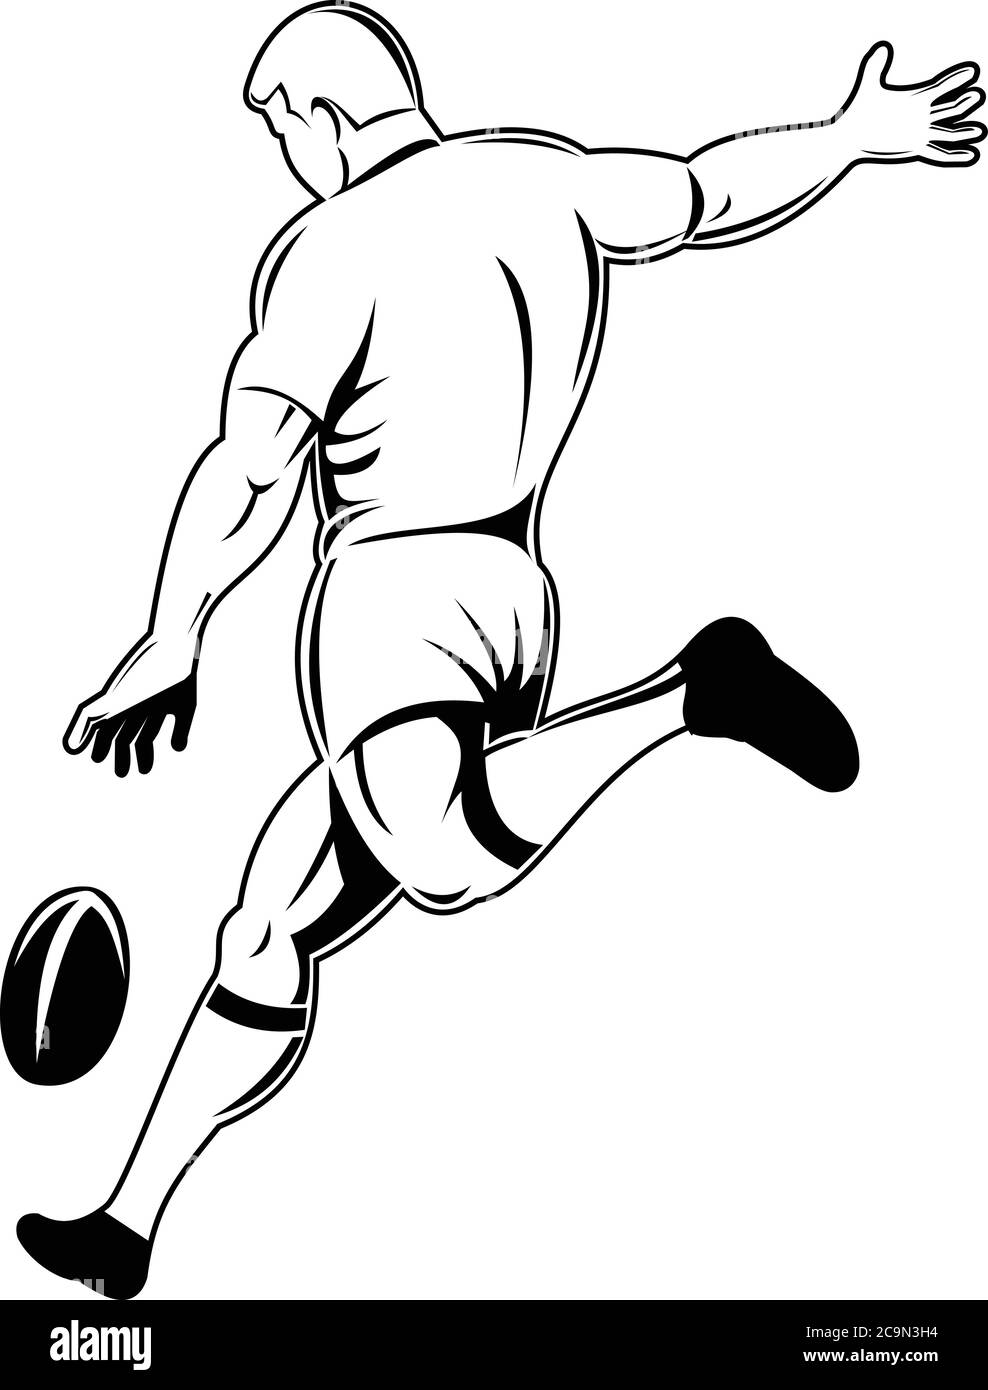 Retro woodcut style illustration of a rugby player or kicker drop kicking the ball viewed from rear or side on isolated background done in black and w Stock Vector